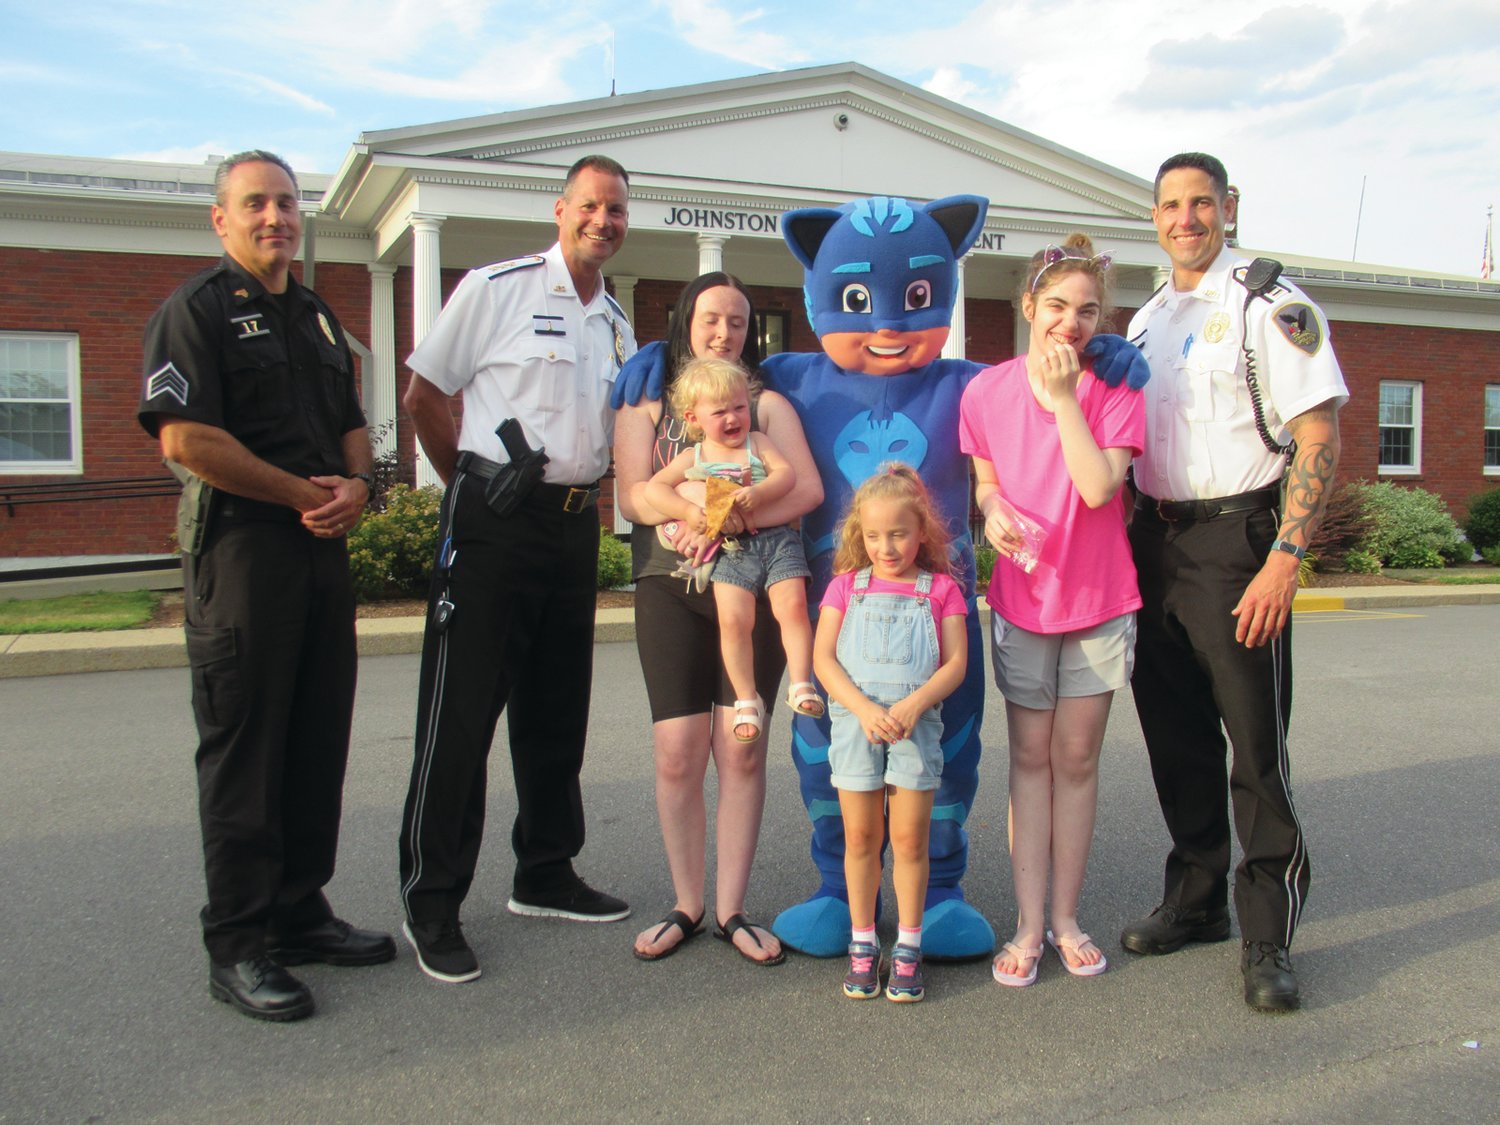 PIZZA PARTY PALS: JPD Chief Joseph P. Razza, Capt. Mike Babbitt and Sgt. Luca Lancellotti are all smiles while being joined by Charlotte Pinheiro, Avery Hedyka, Lydia Hedyka and Kayla Beaudry during last Wednesday’s super social event in Johnston.